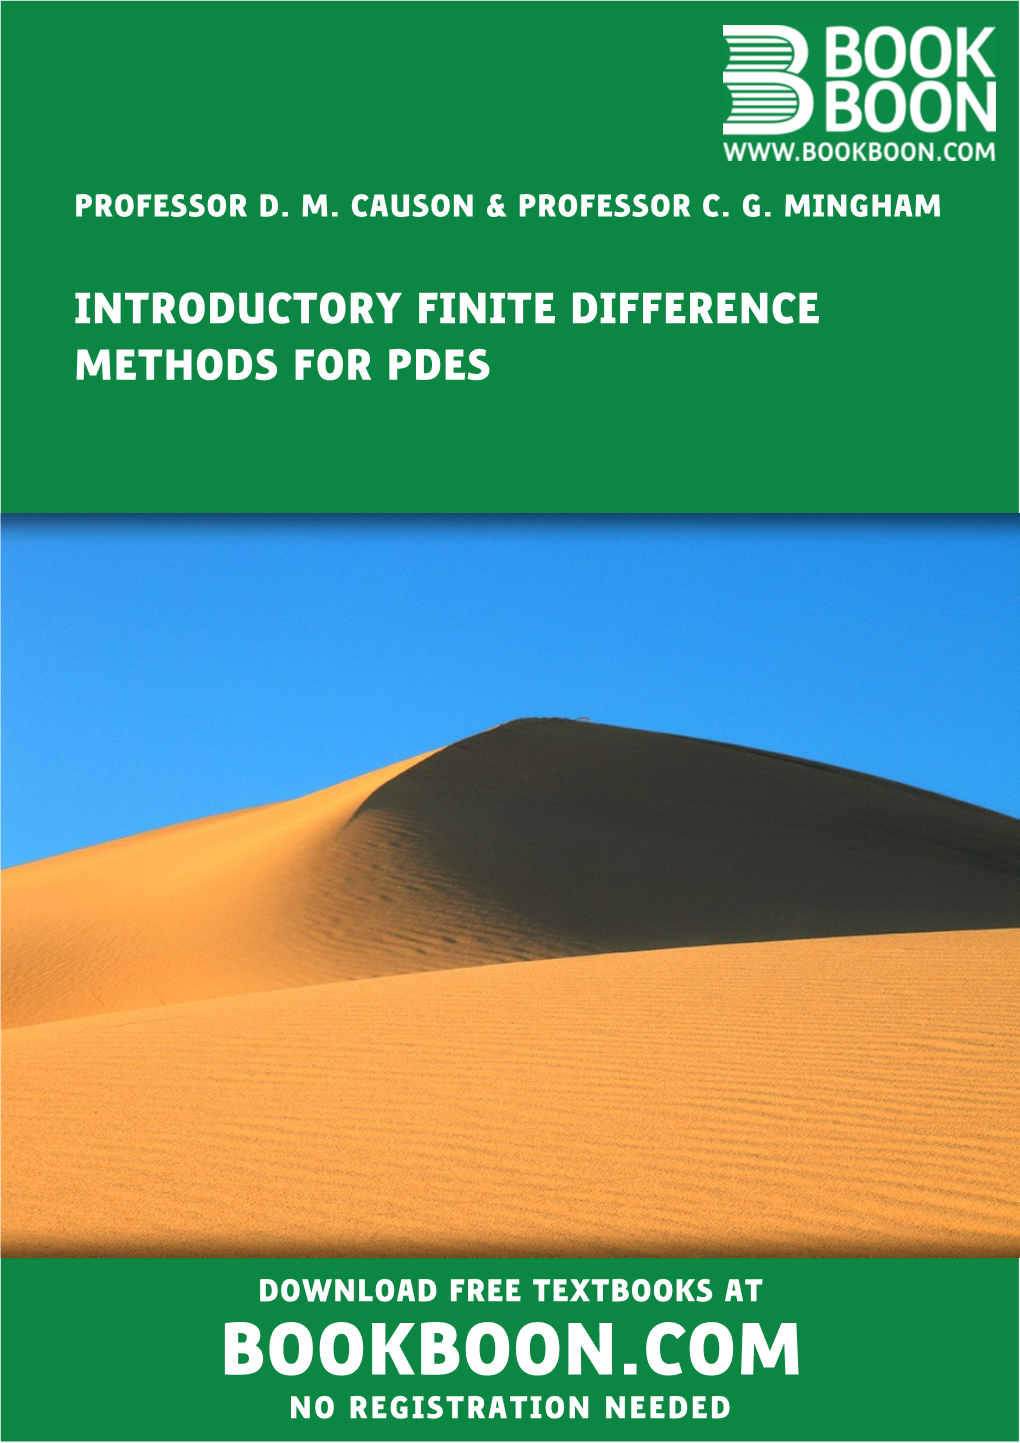 Introductory Finite Difference Methods for Pdes